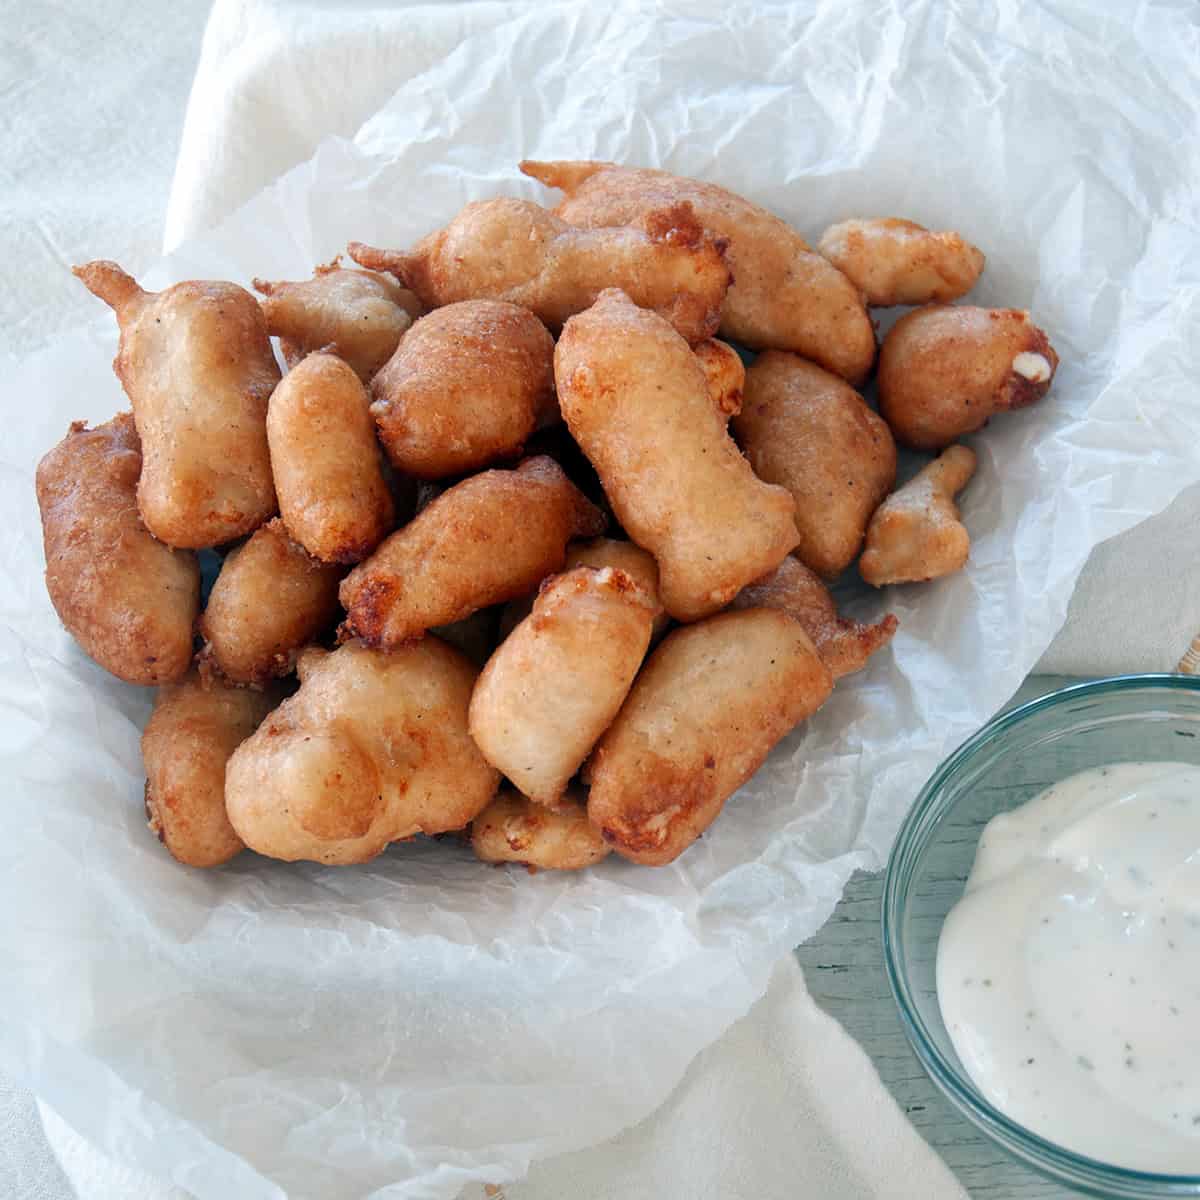 Pile of cheese curds with a side of ranch dressing.